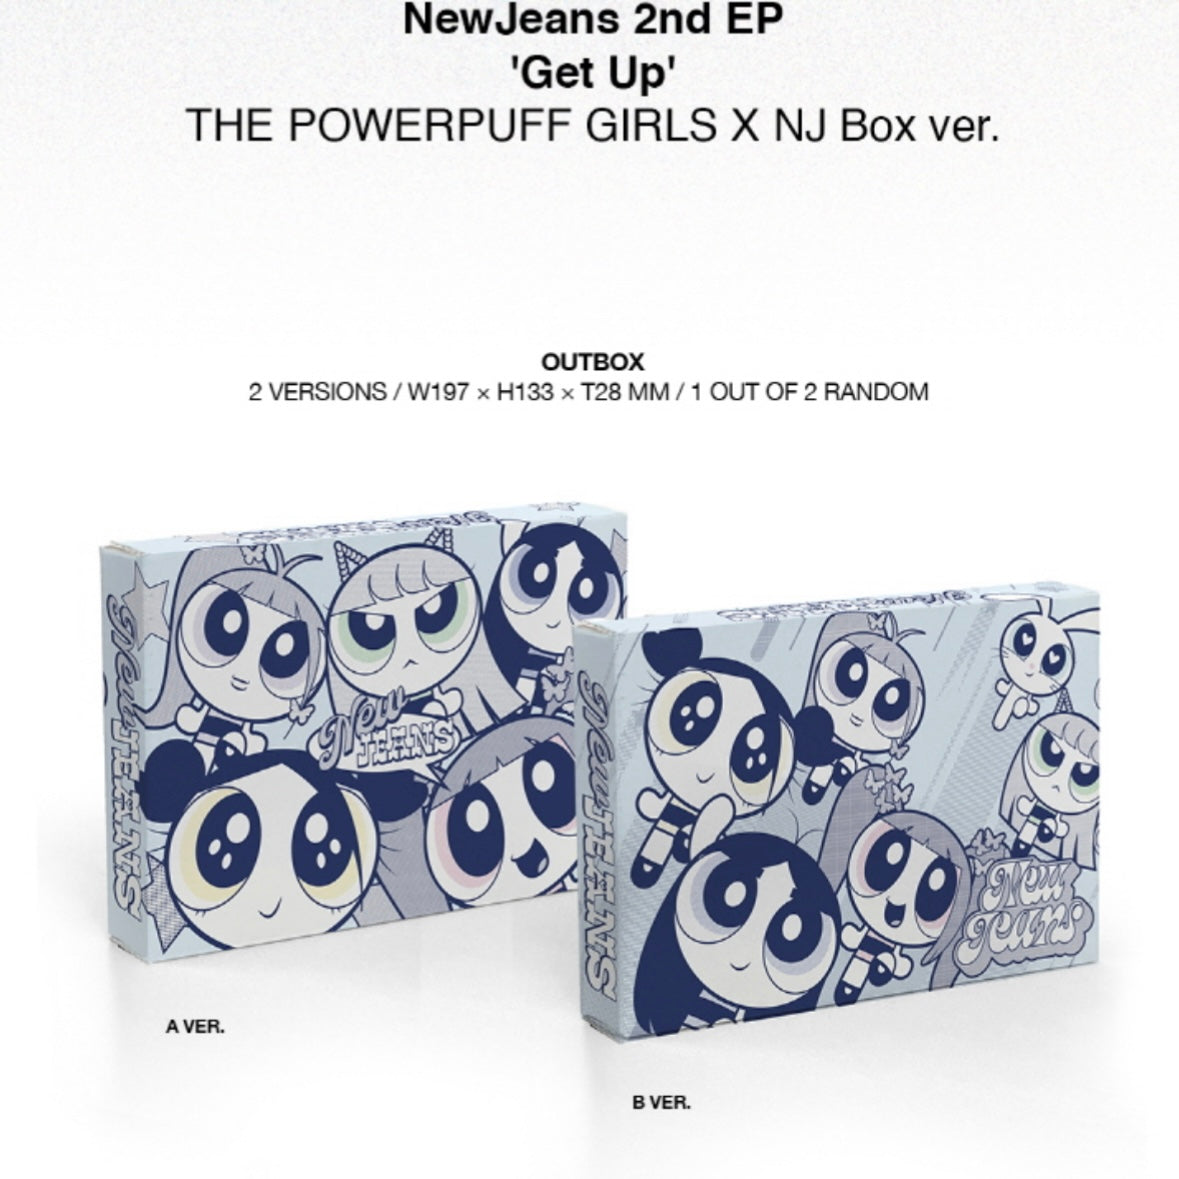 NEWJEANS - 2ND EP 'GET UP' [THE POWERPUFF GIRLS X NJ BOX VER.] (2 VERSIONS)